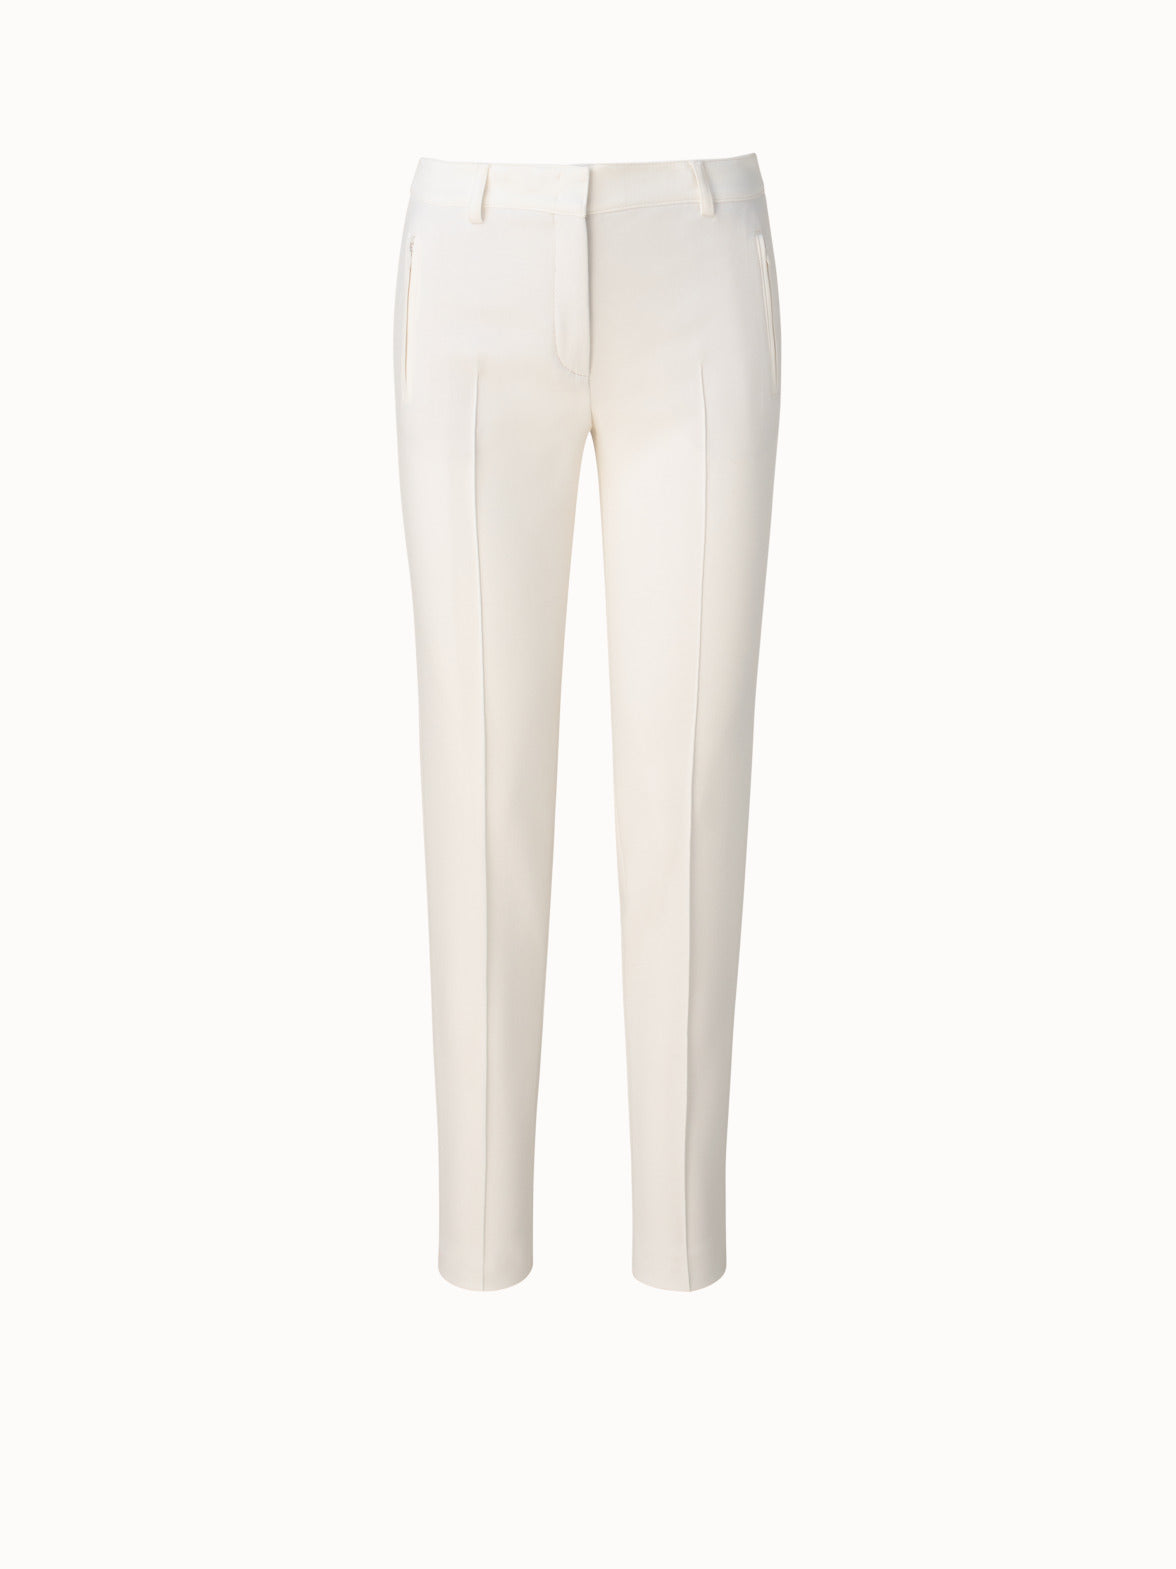 How to wear and style white trousers